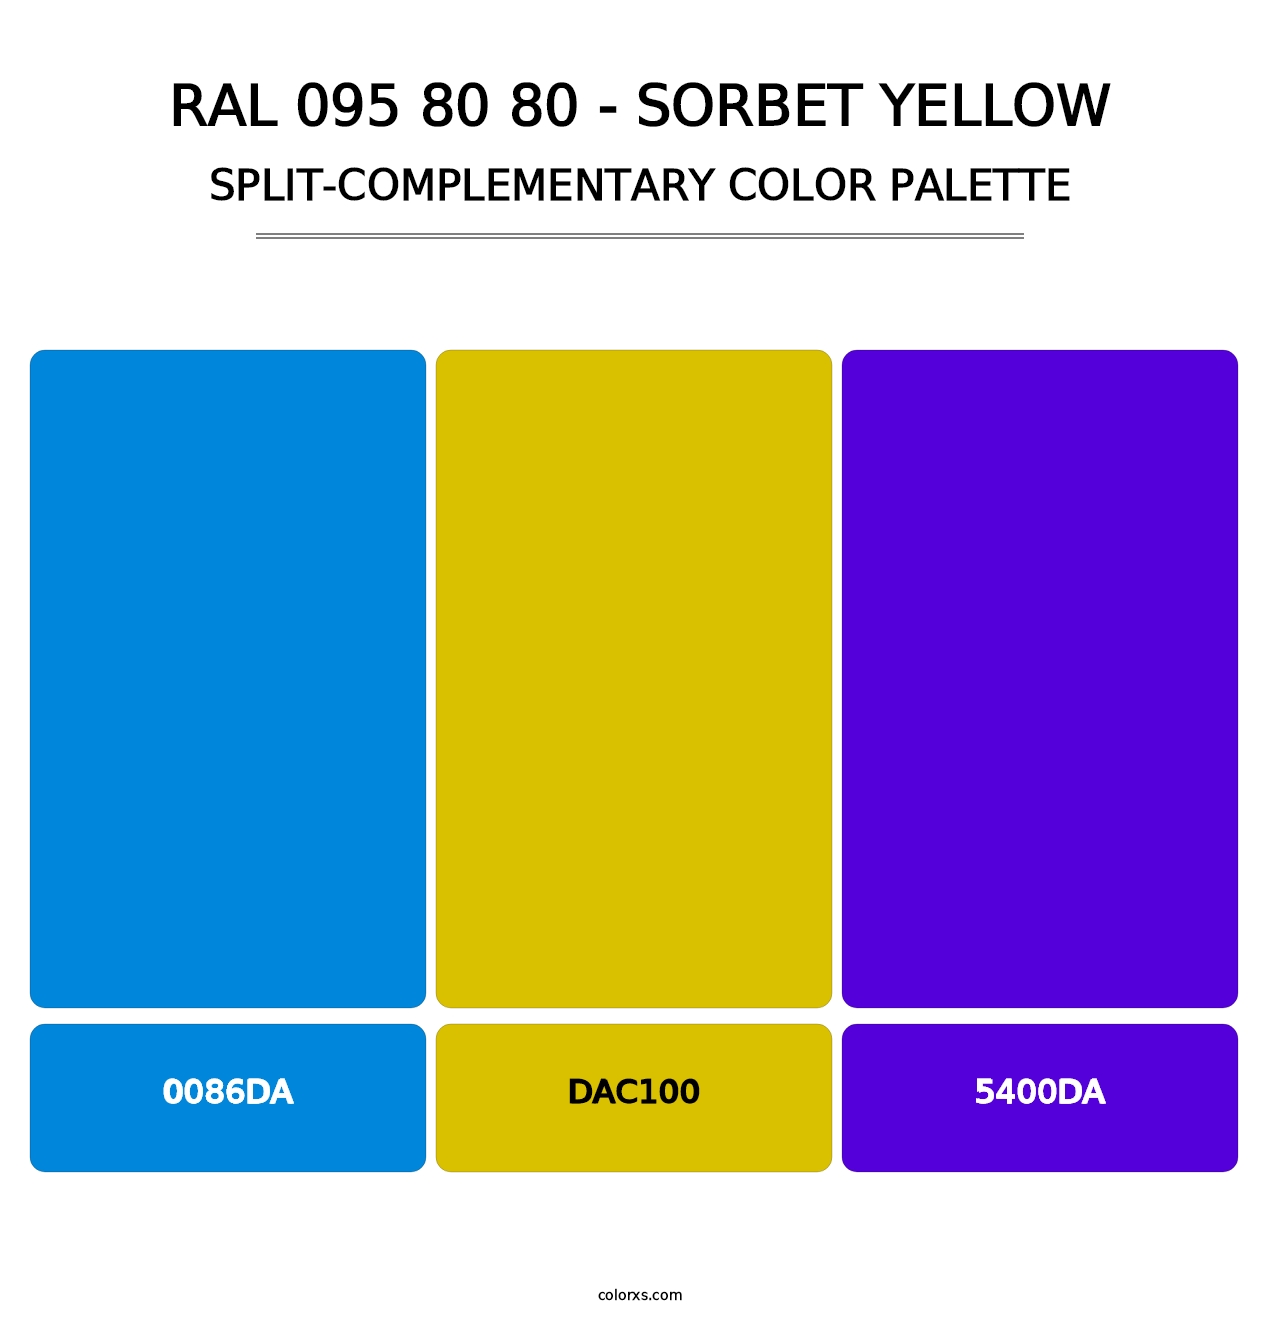 RAL 095 80 80 - Sorbet Yellow - Split-Complementary Color Palette